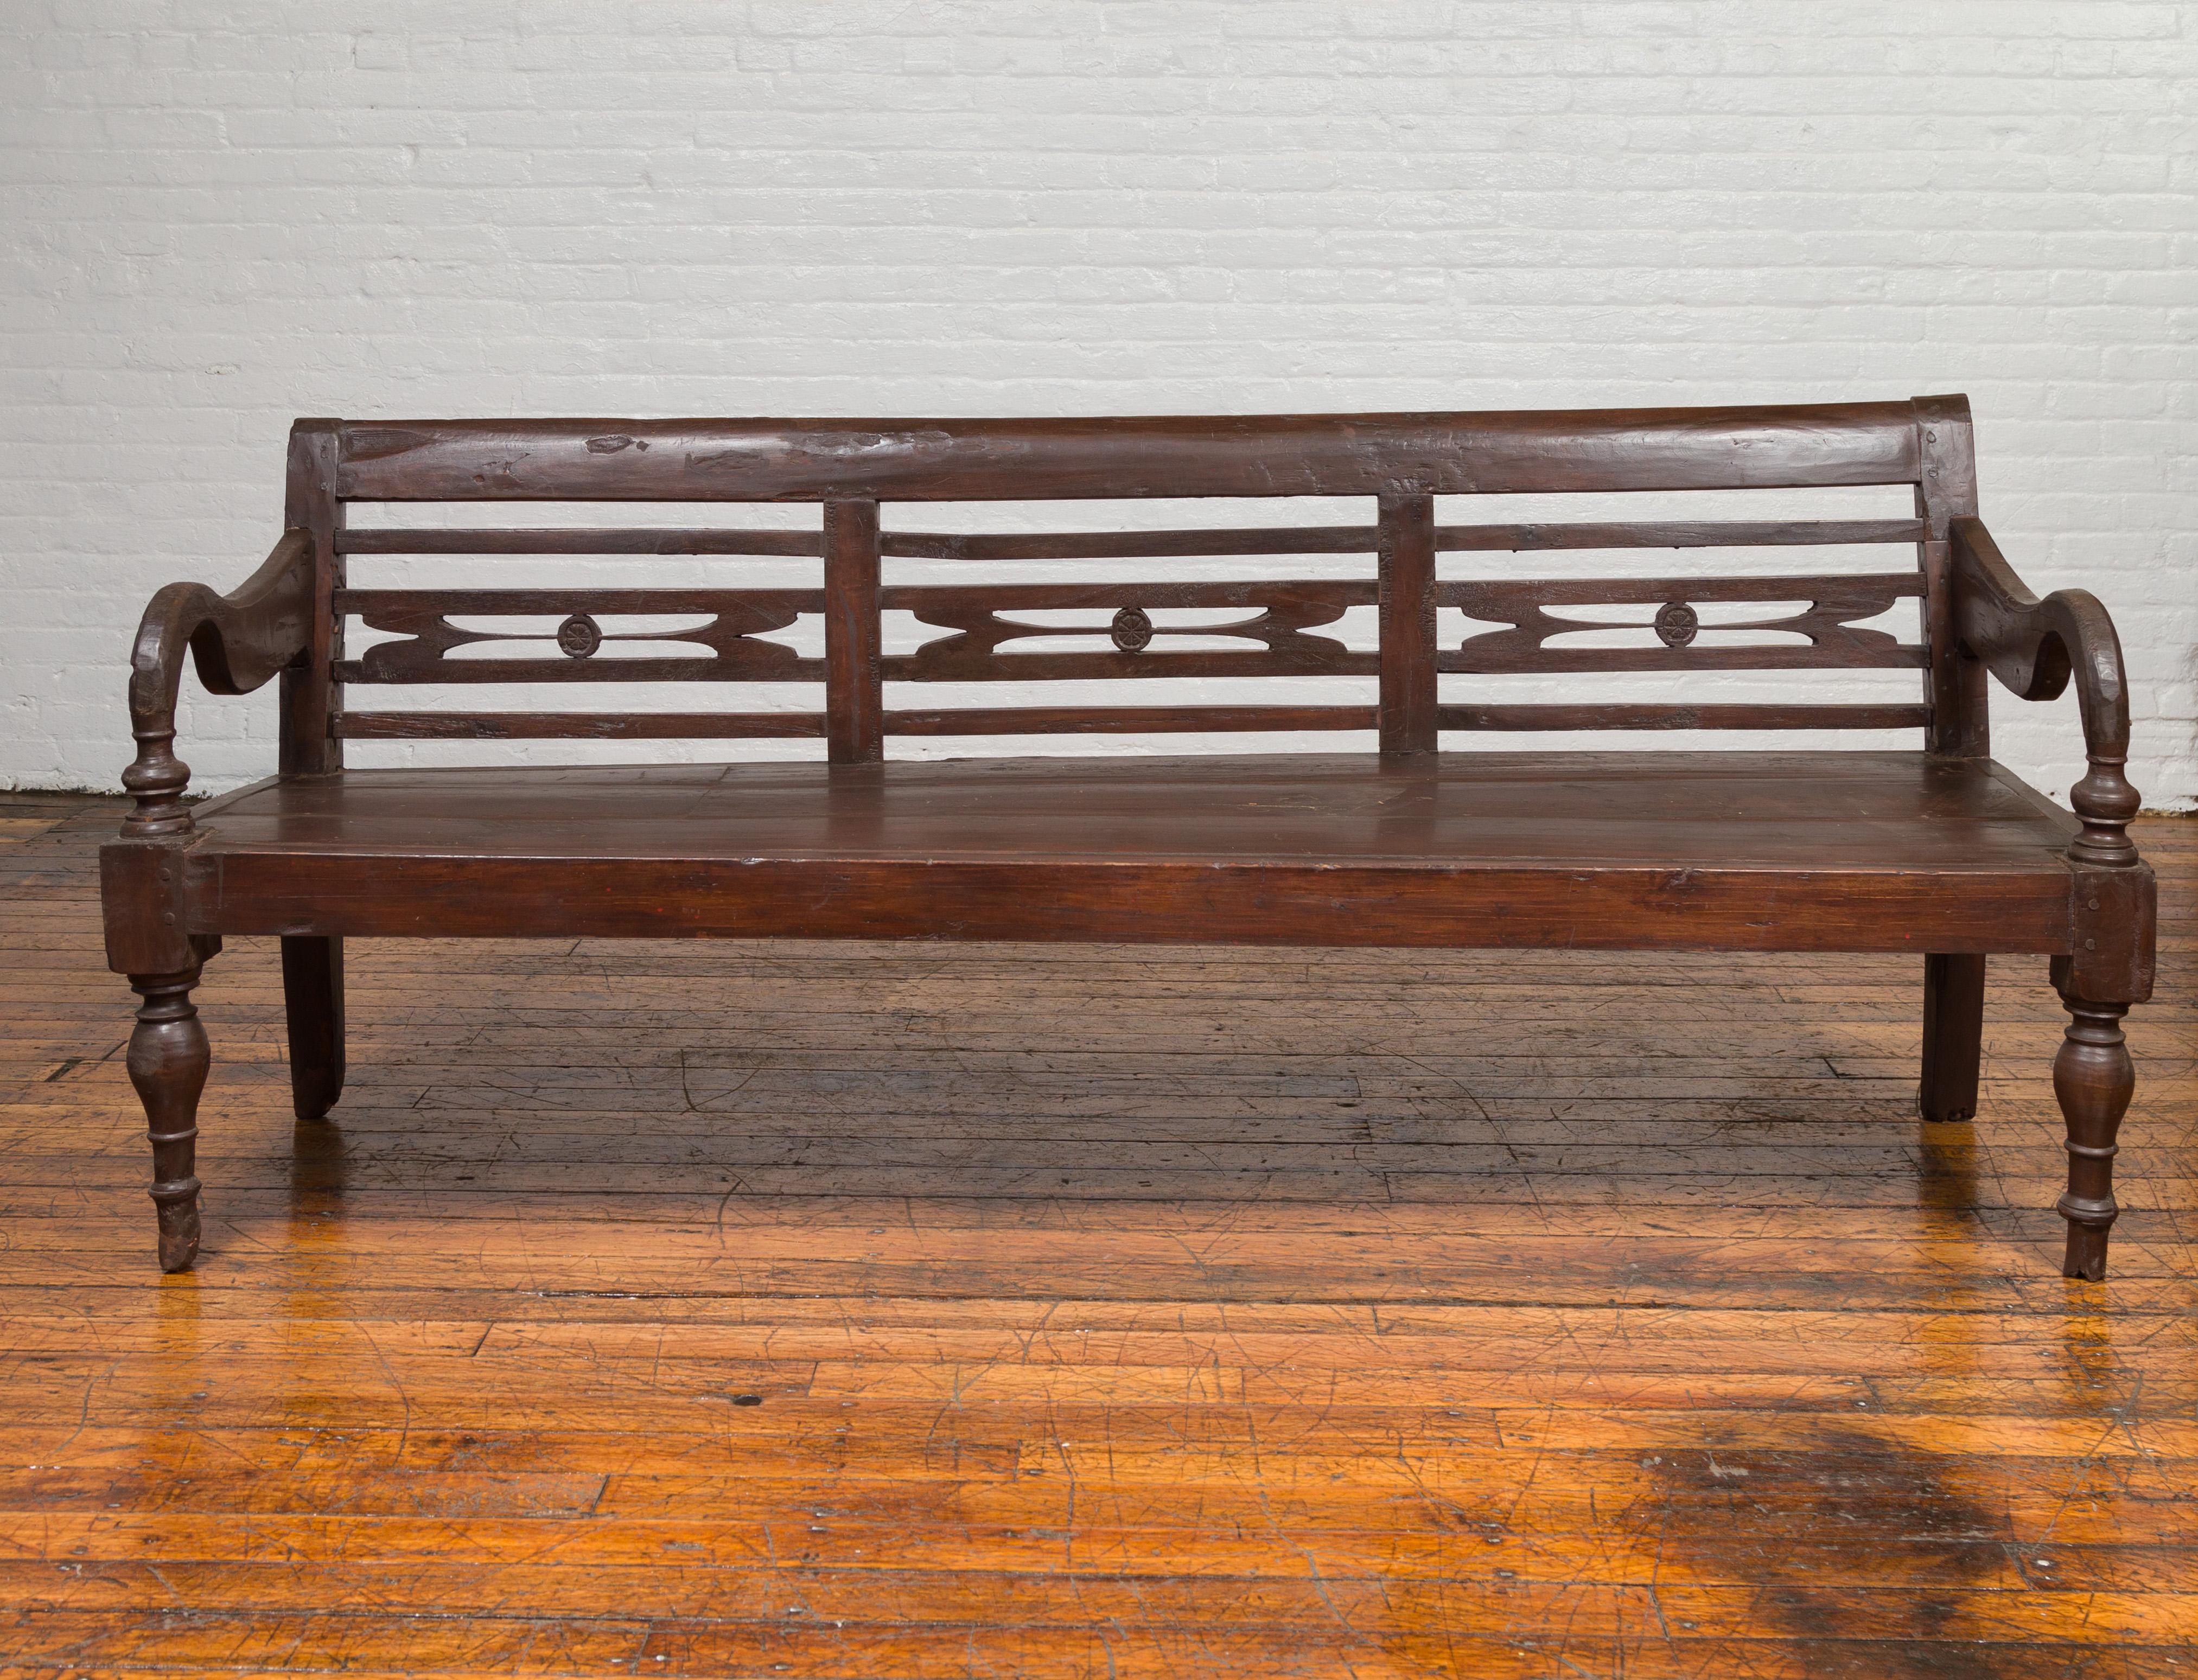 An antique Dutch Colonial Indonesian teak wood garden bench from the 19th century, with pierced back, petite medallions and scrolling arms. Found in Jakarta, this 19th century Dutch Colonial bench features a slightly out-curving back, pierced with